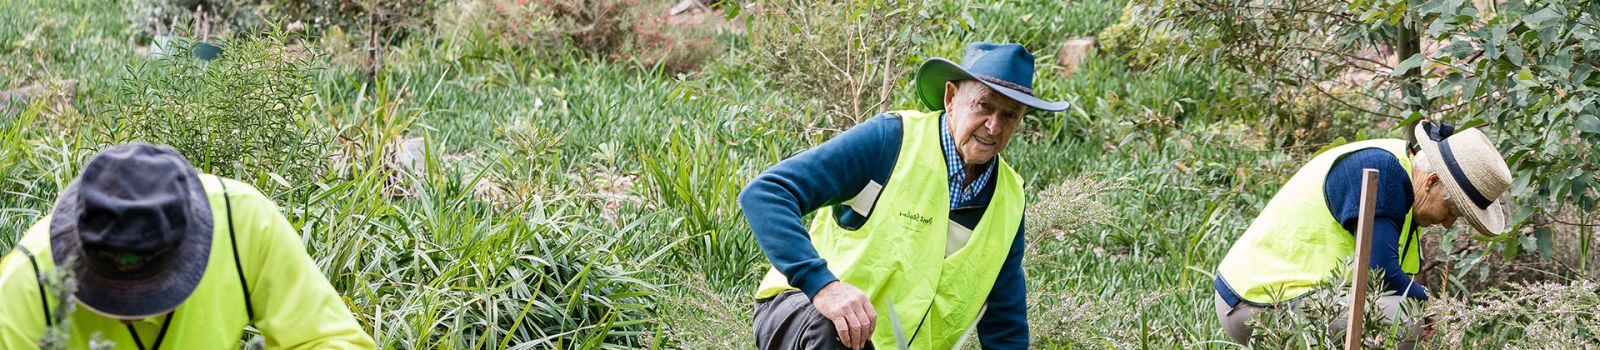 Photograph of a man with a hat and high vis clothing on leaning in the bush  banner image